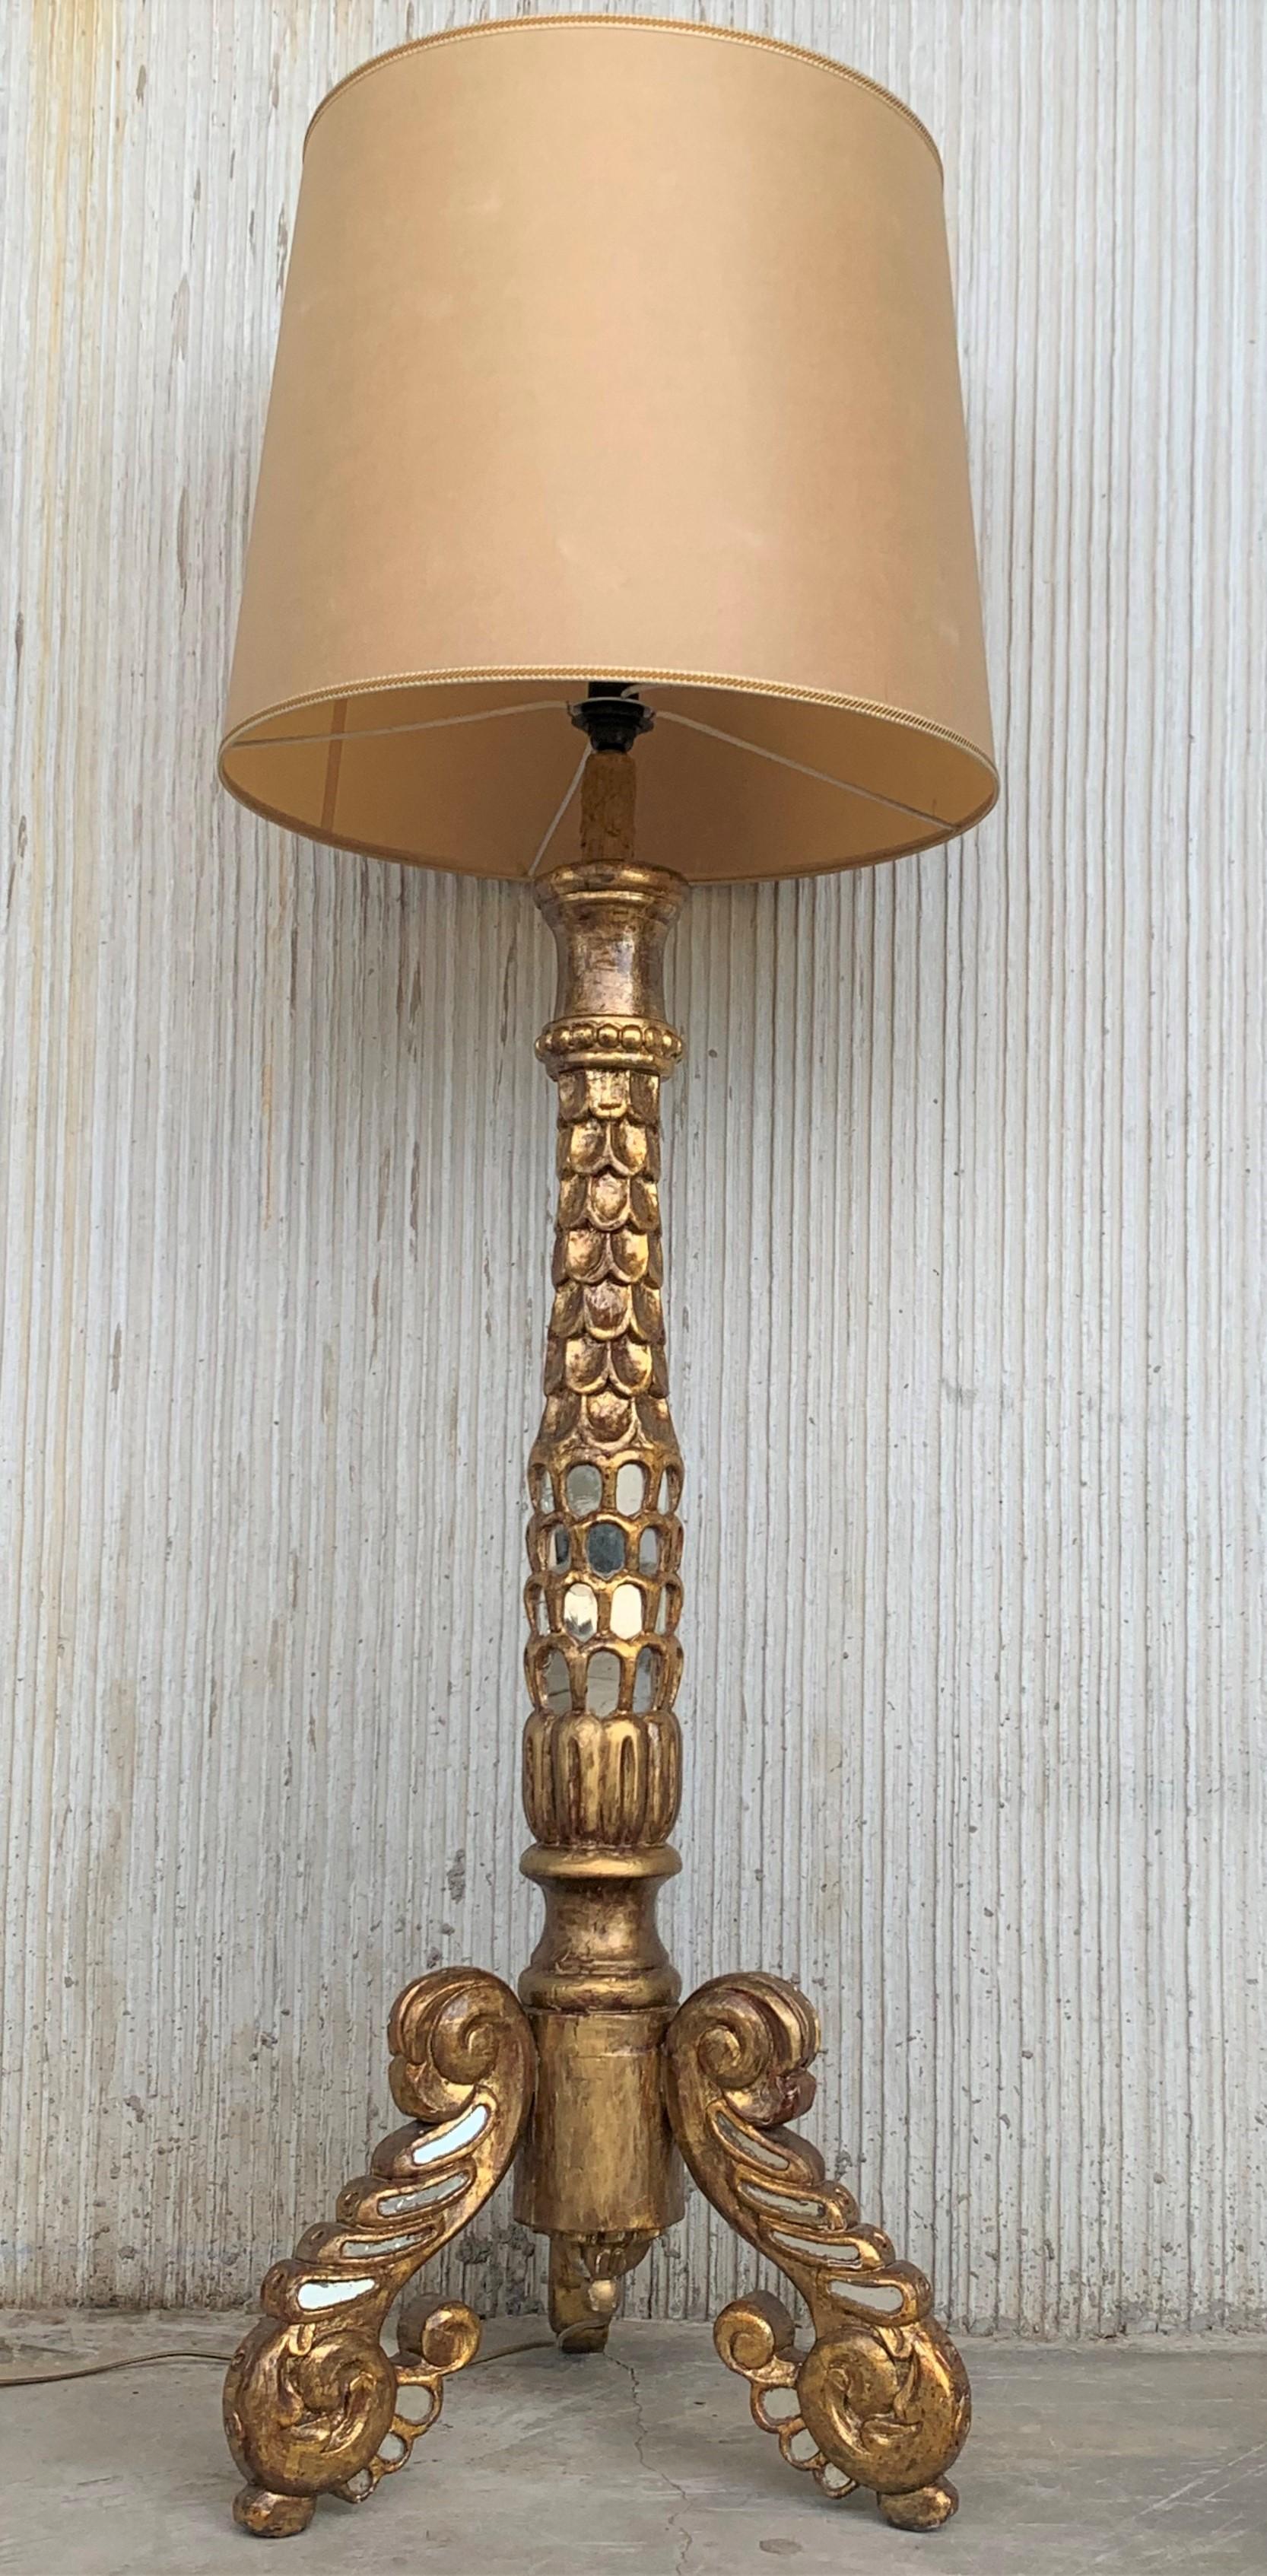 20th century Italian giltwood and mirrored floor lamp or torchère with lampshade
Large carved and gilded wooden floor lamp antique torchère with gold leaf. It has been electrified for modern use with a light bulb. Very good condition.

Rewired.